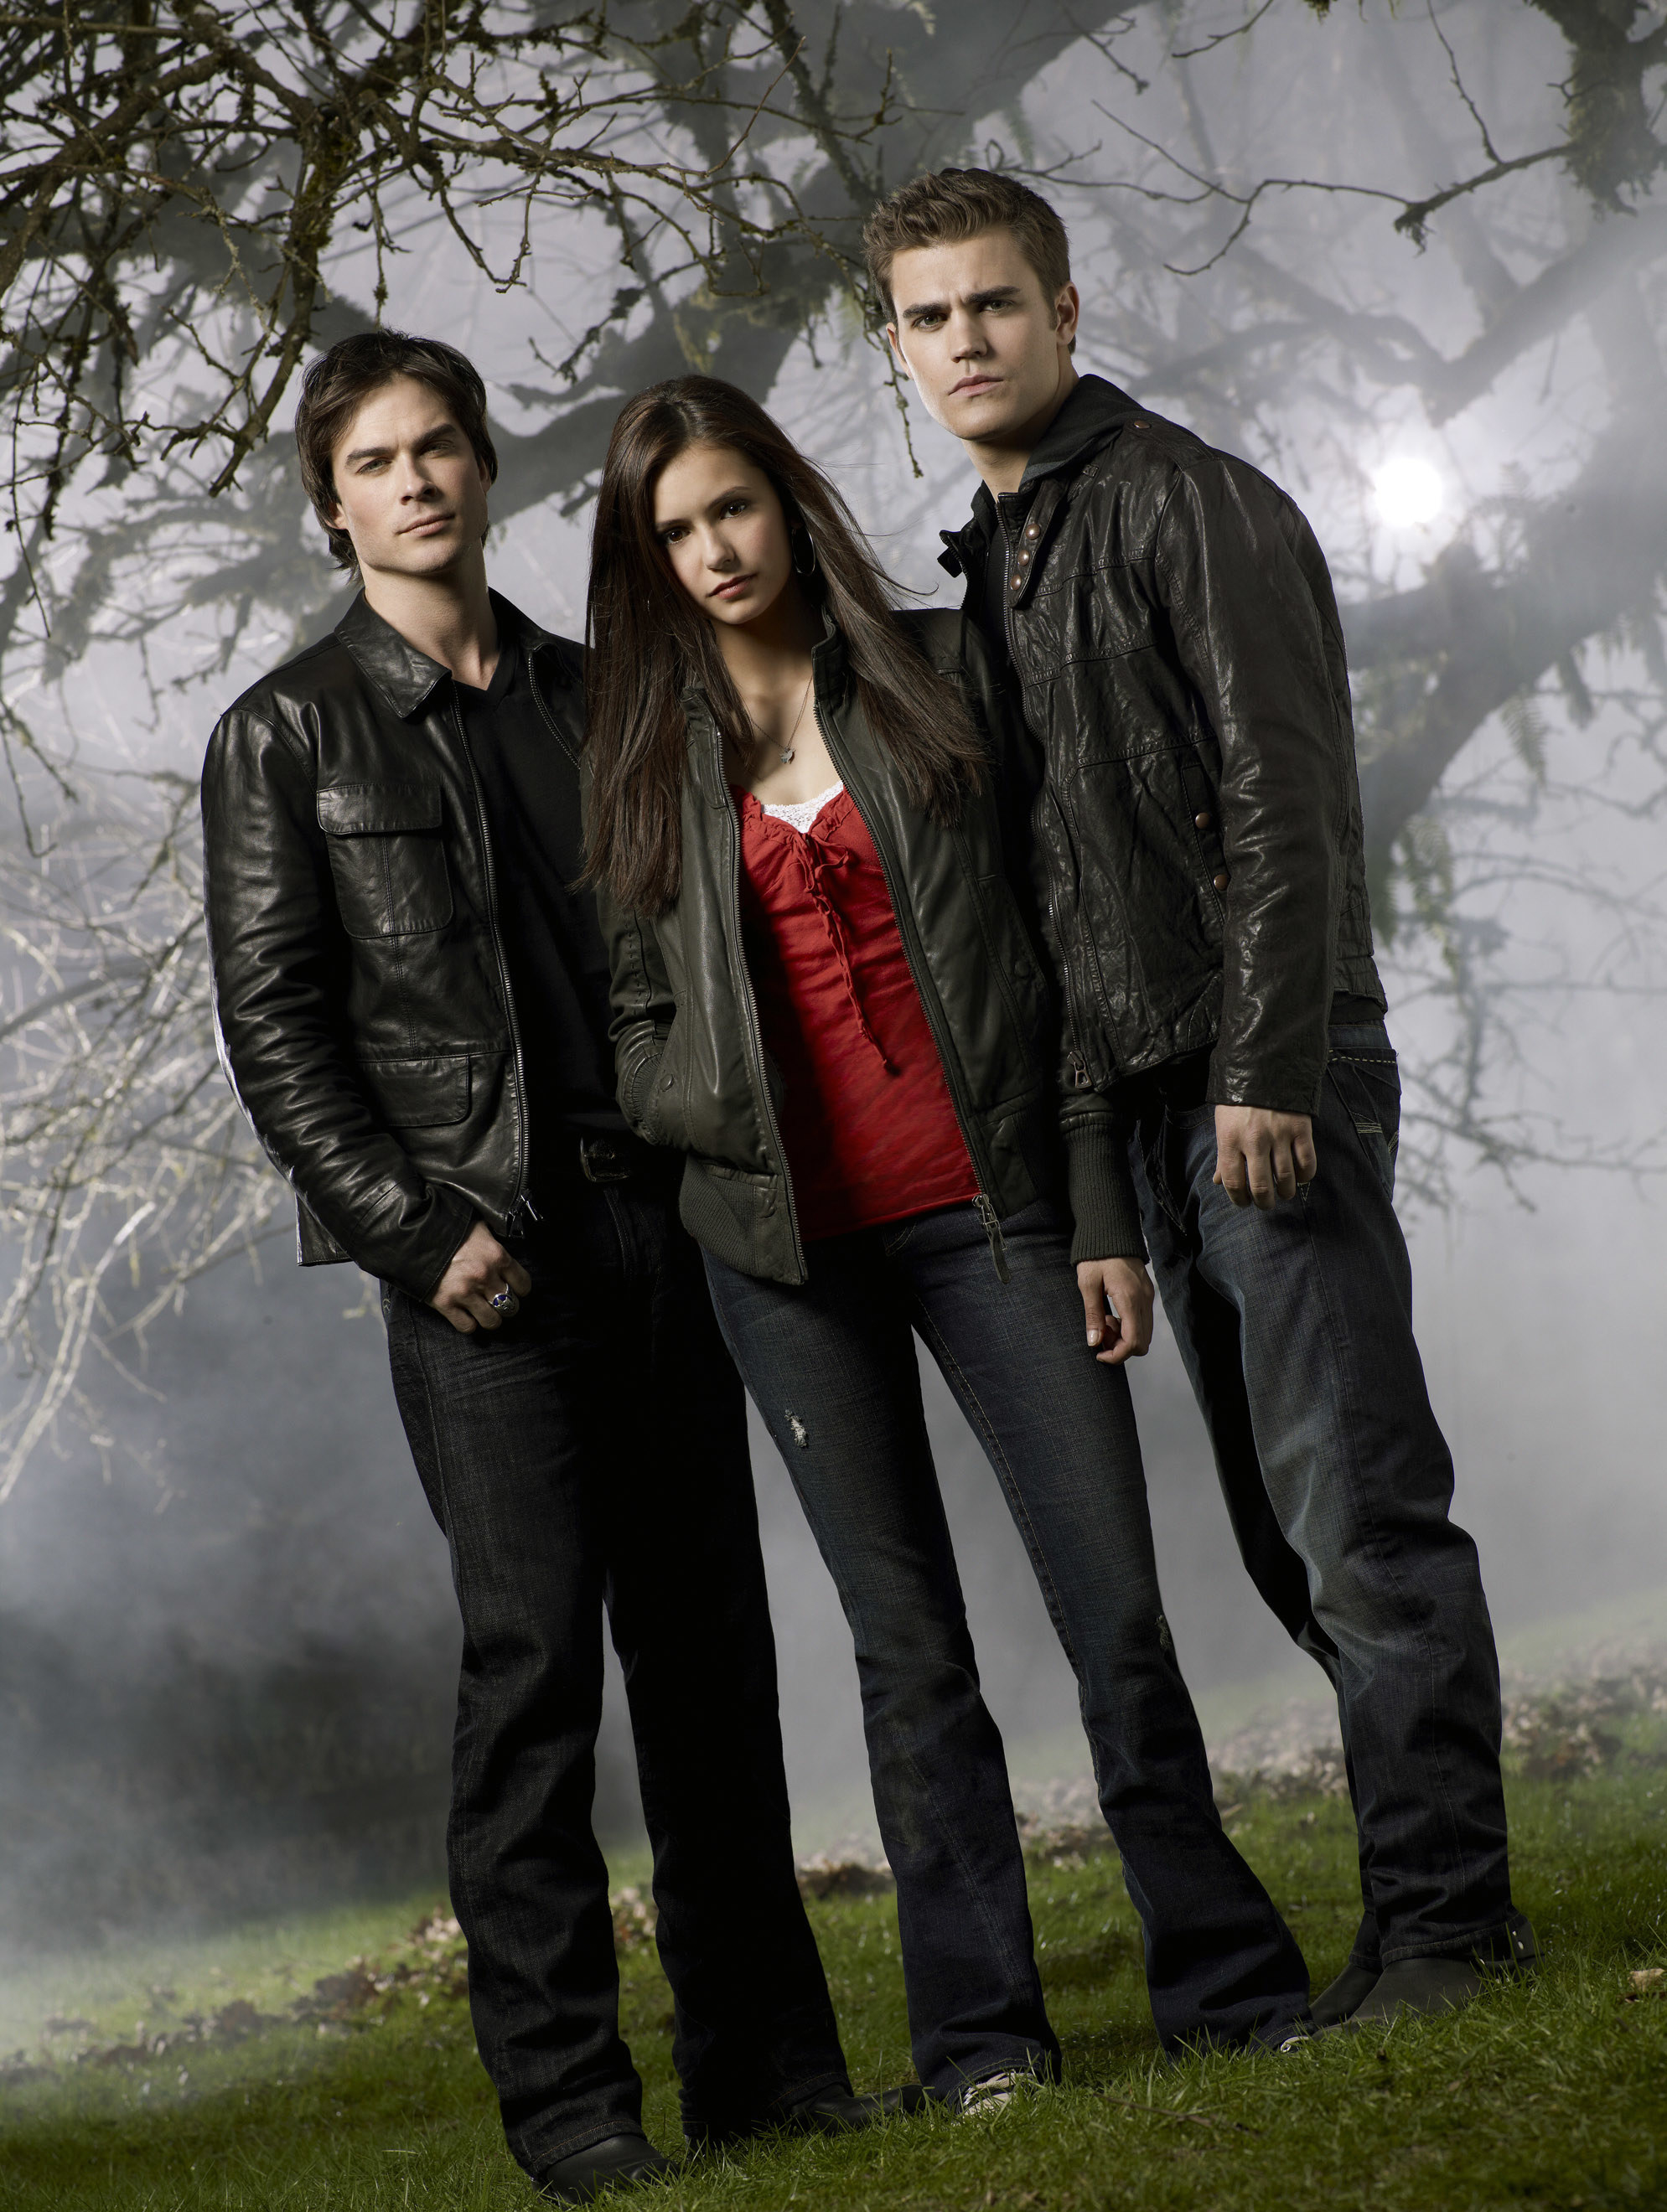 Promo shot with Damon, Stefan, and Elena